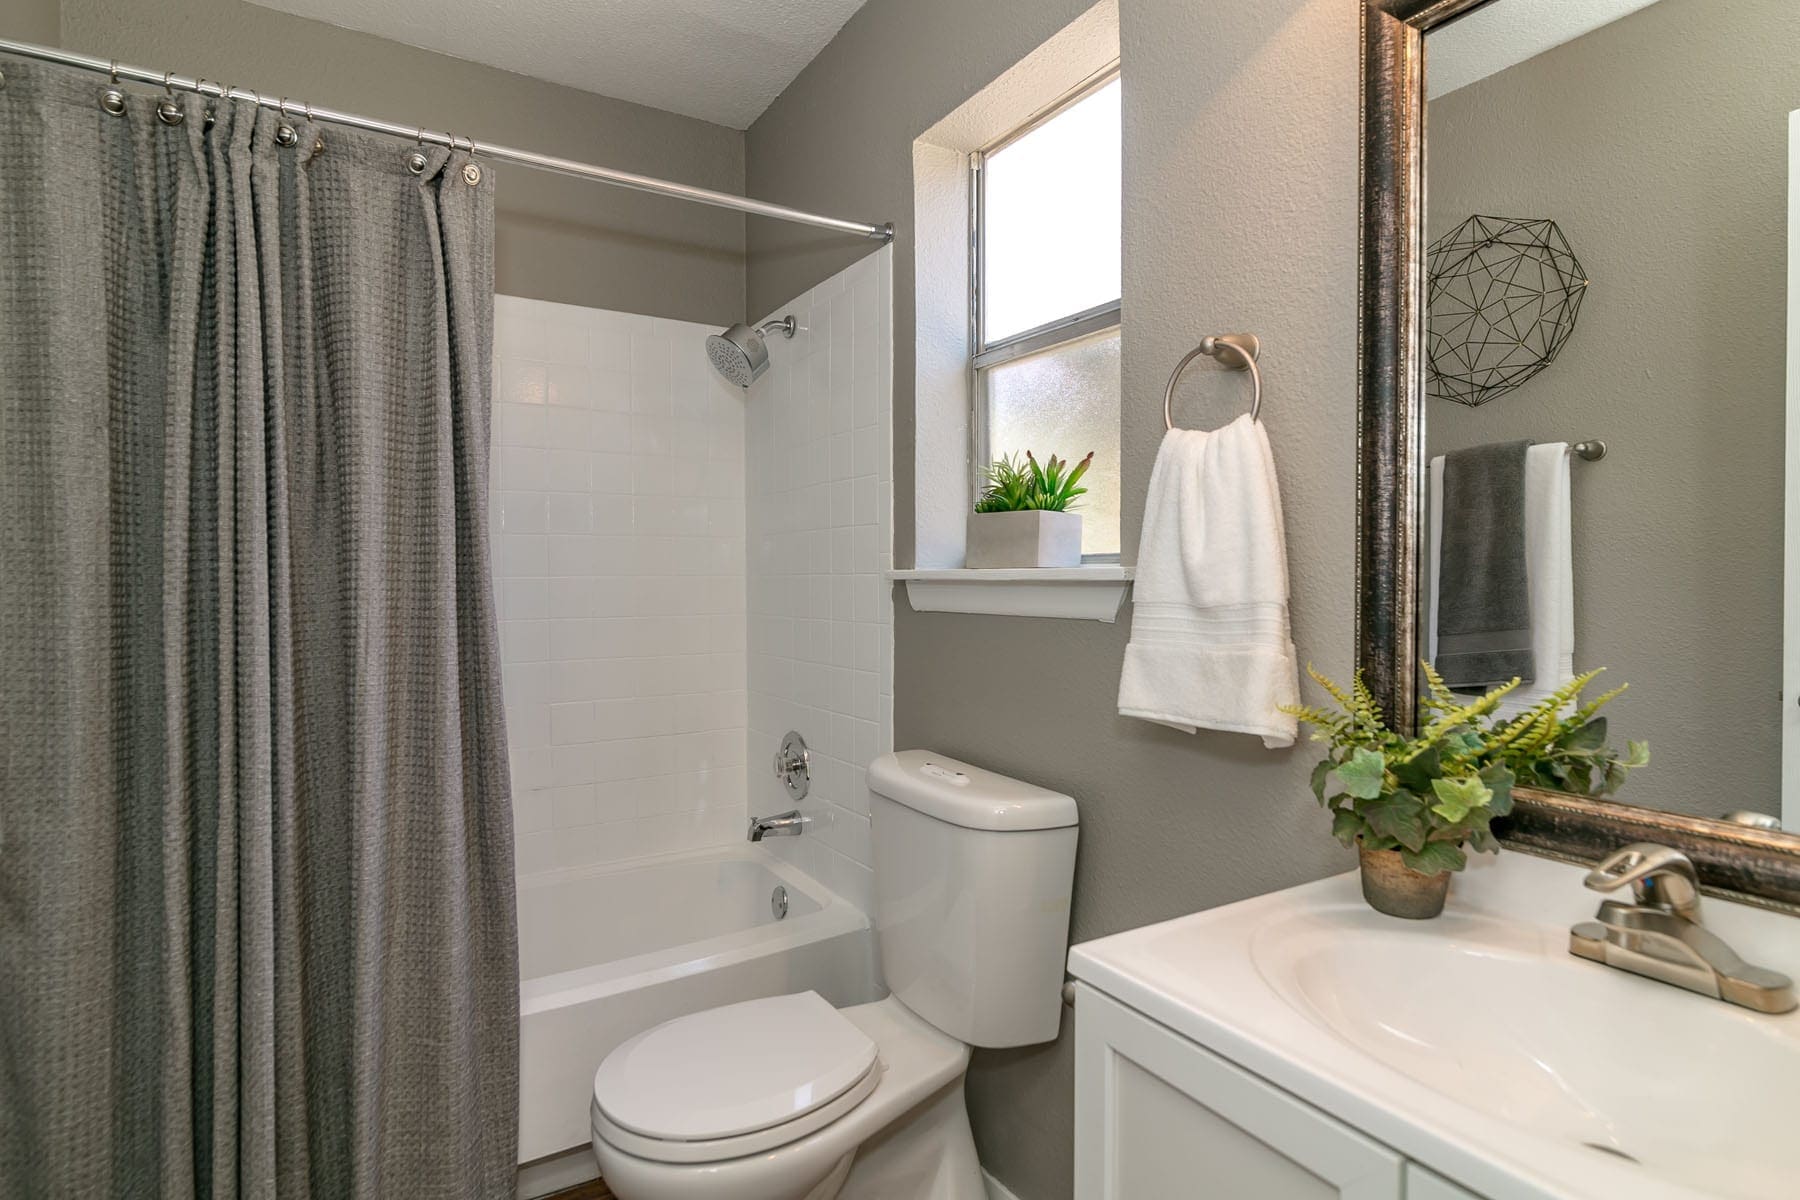 Apartments for Rent in San Antonio, TX - City-Base Vista - Bathroom with Grey Walls, Small Window, and Large Mirror